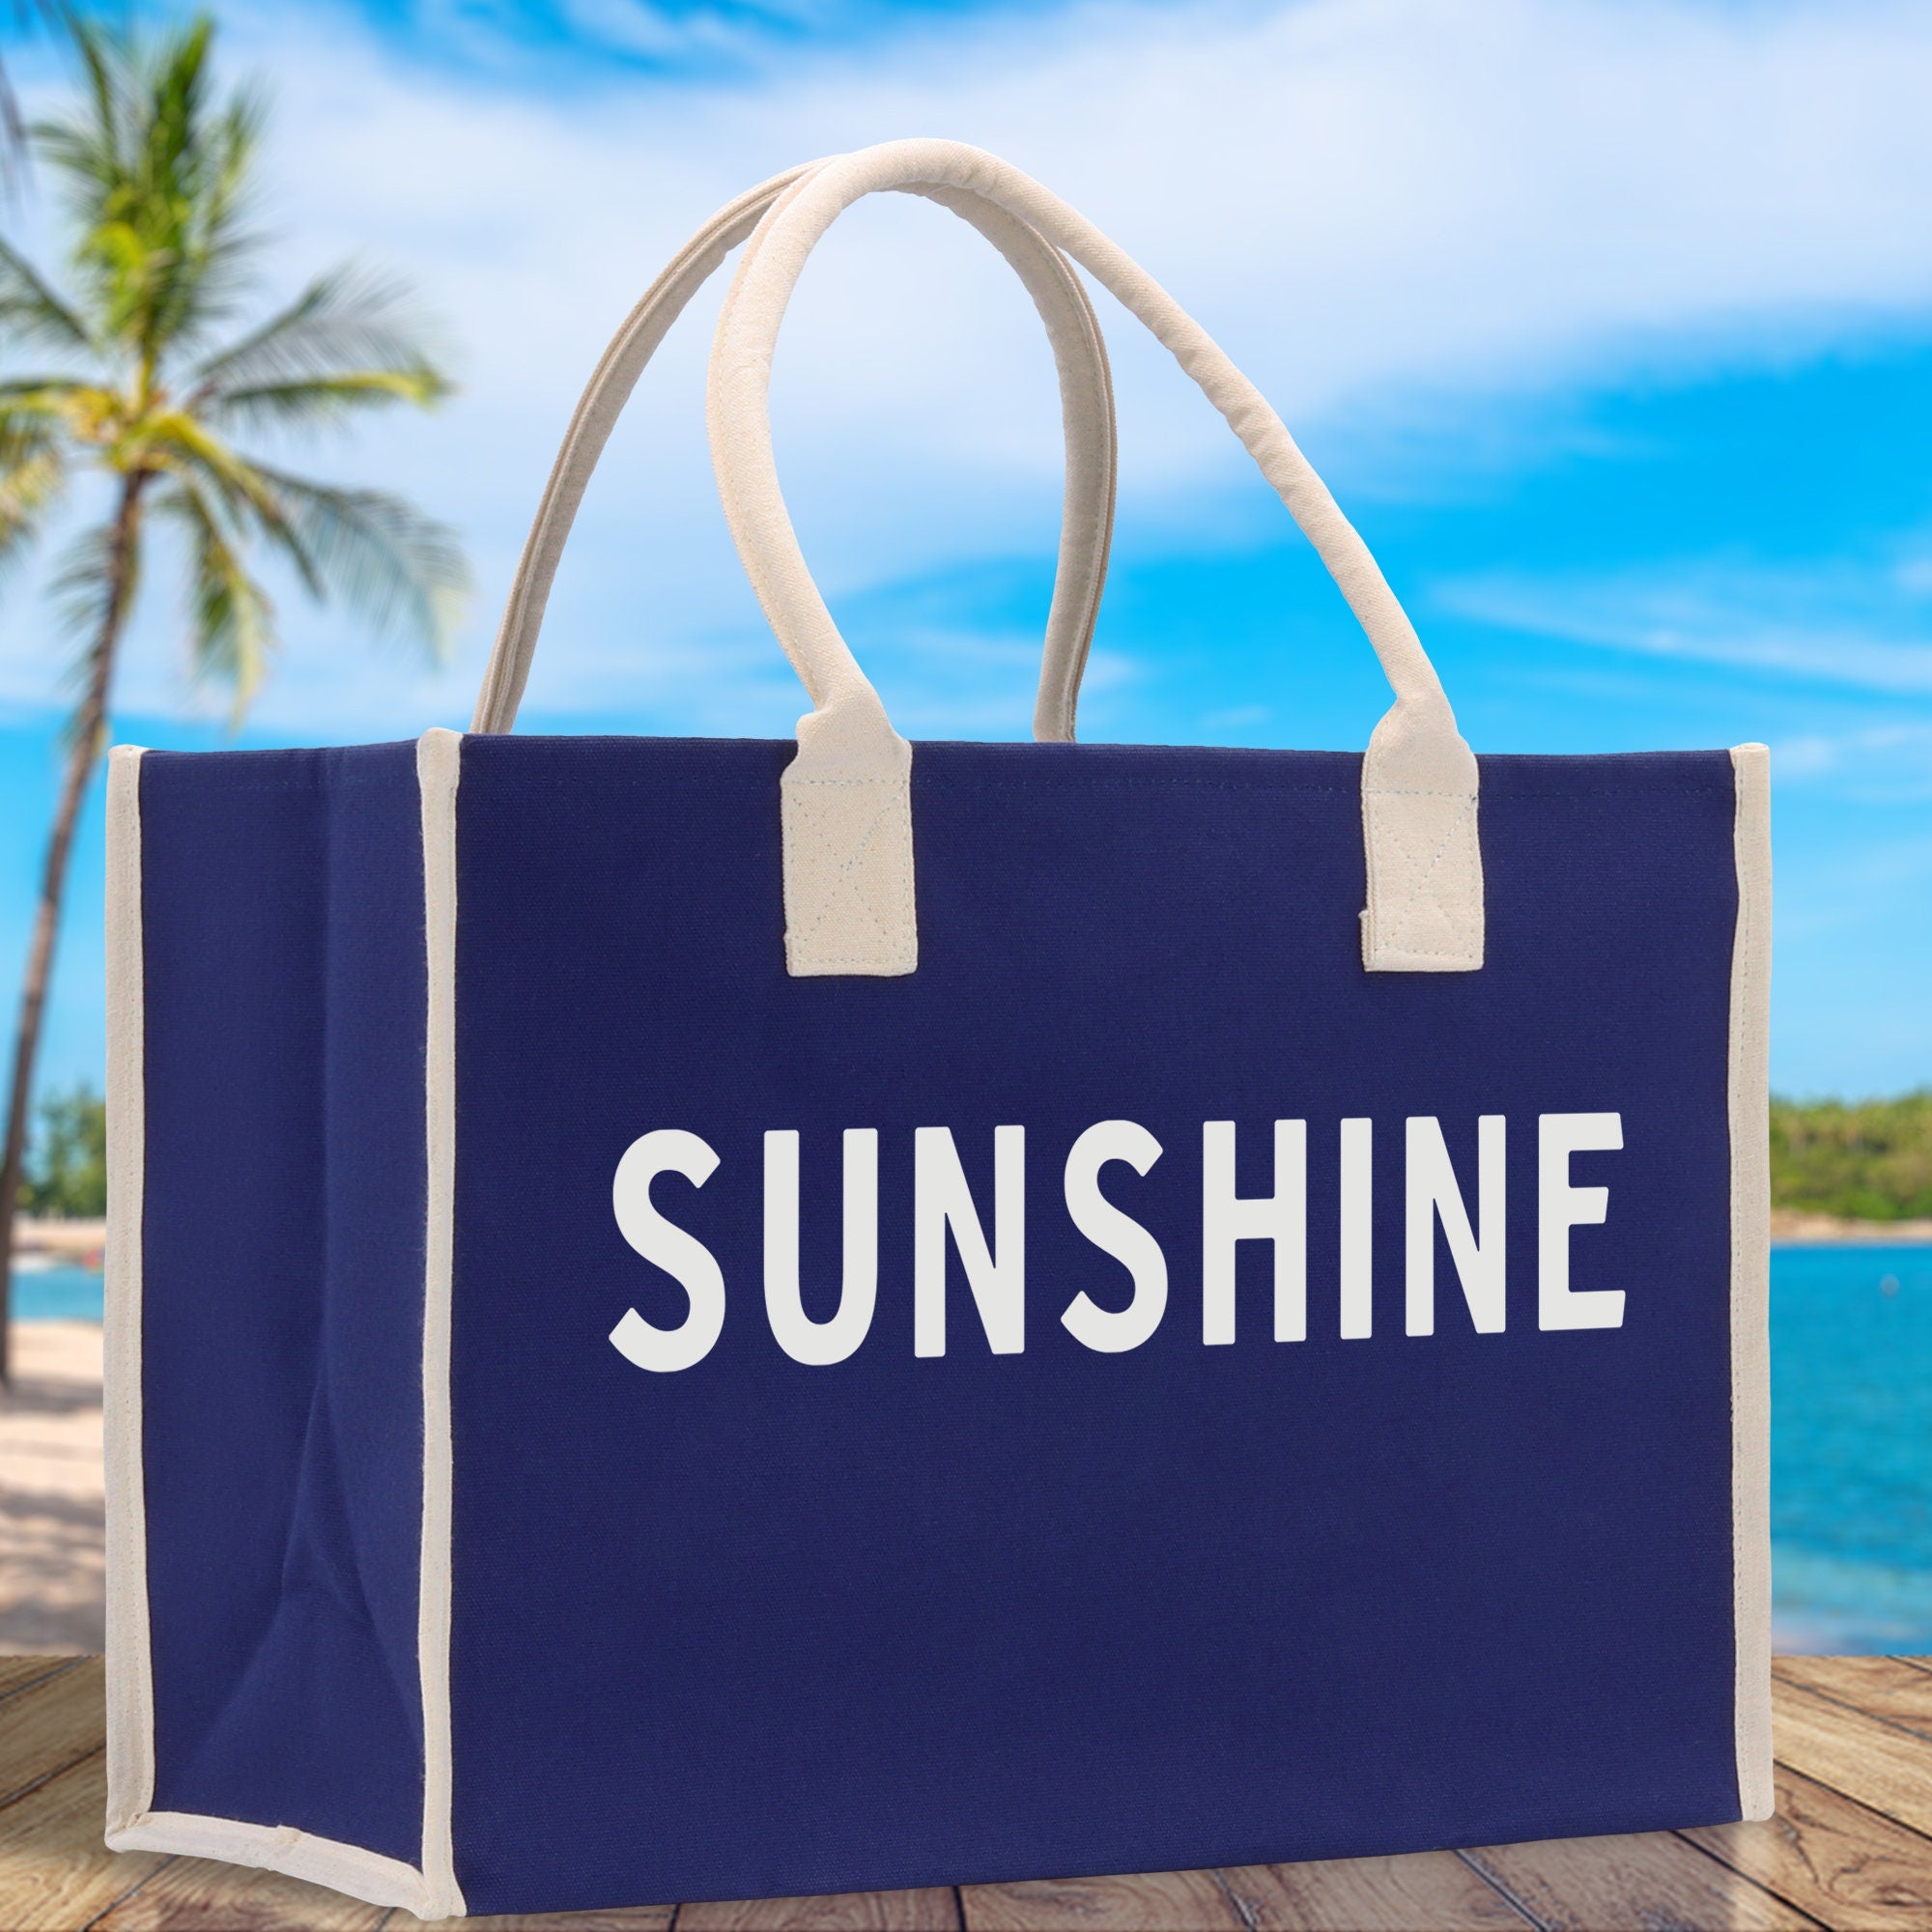 Sunshine Cotton Canvas Chic Beach Tote Bag Multipurpose Tote Weekender Tote Gift for Her Outdoor Tote Vacation Tote Large Beach Bag